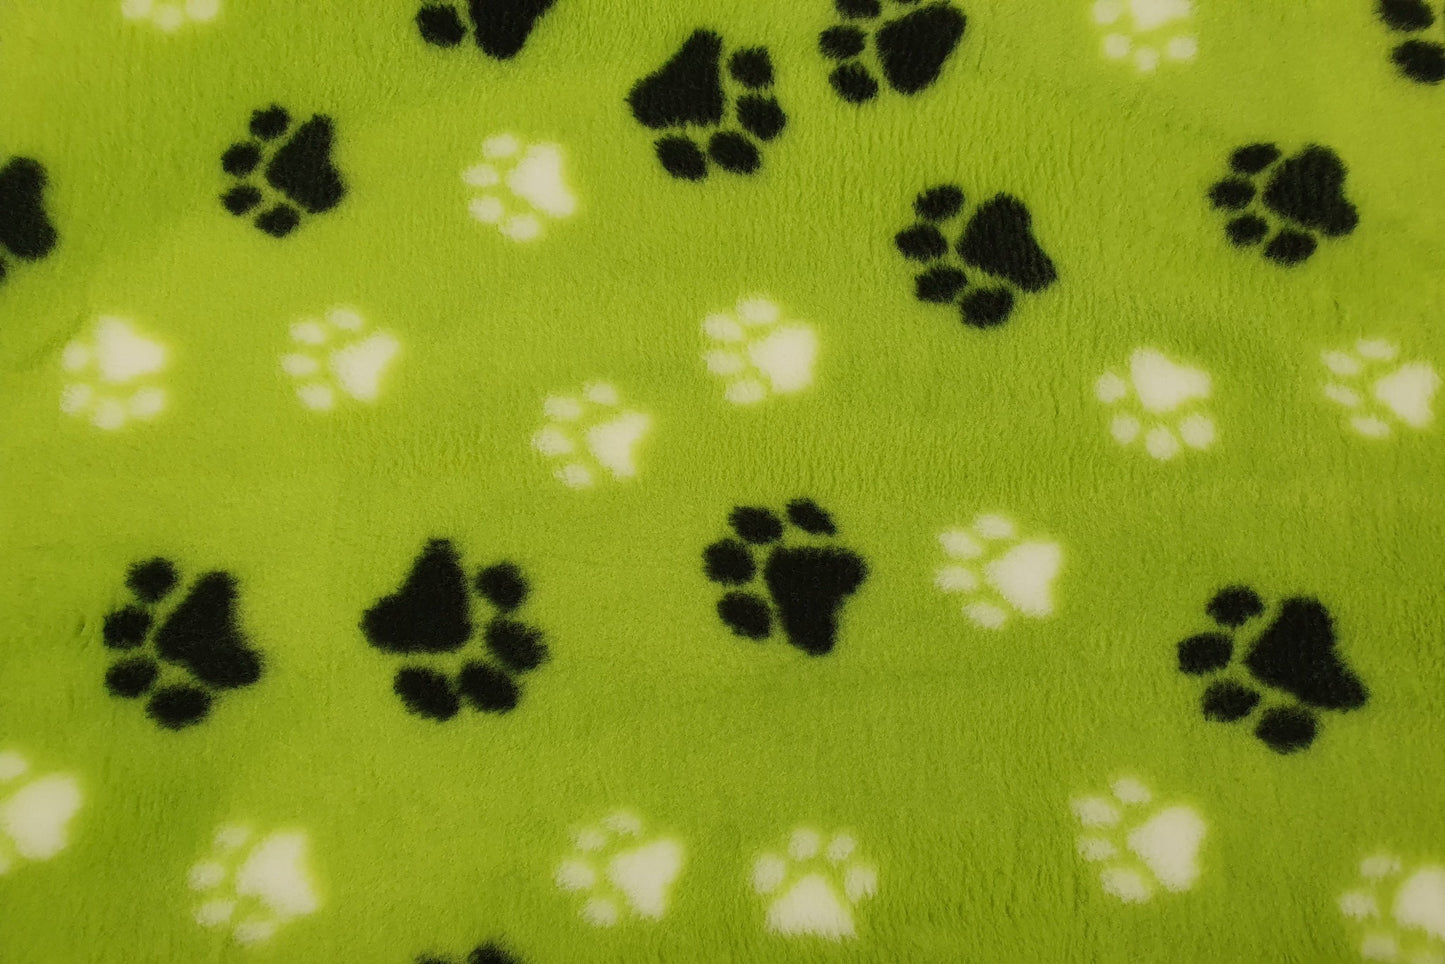 Vet Bed - Green Backed - Lime Green with Black and White Paws